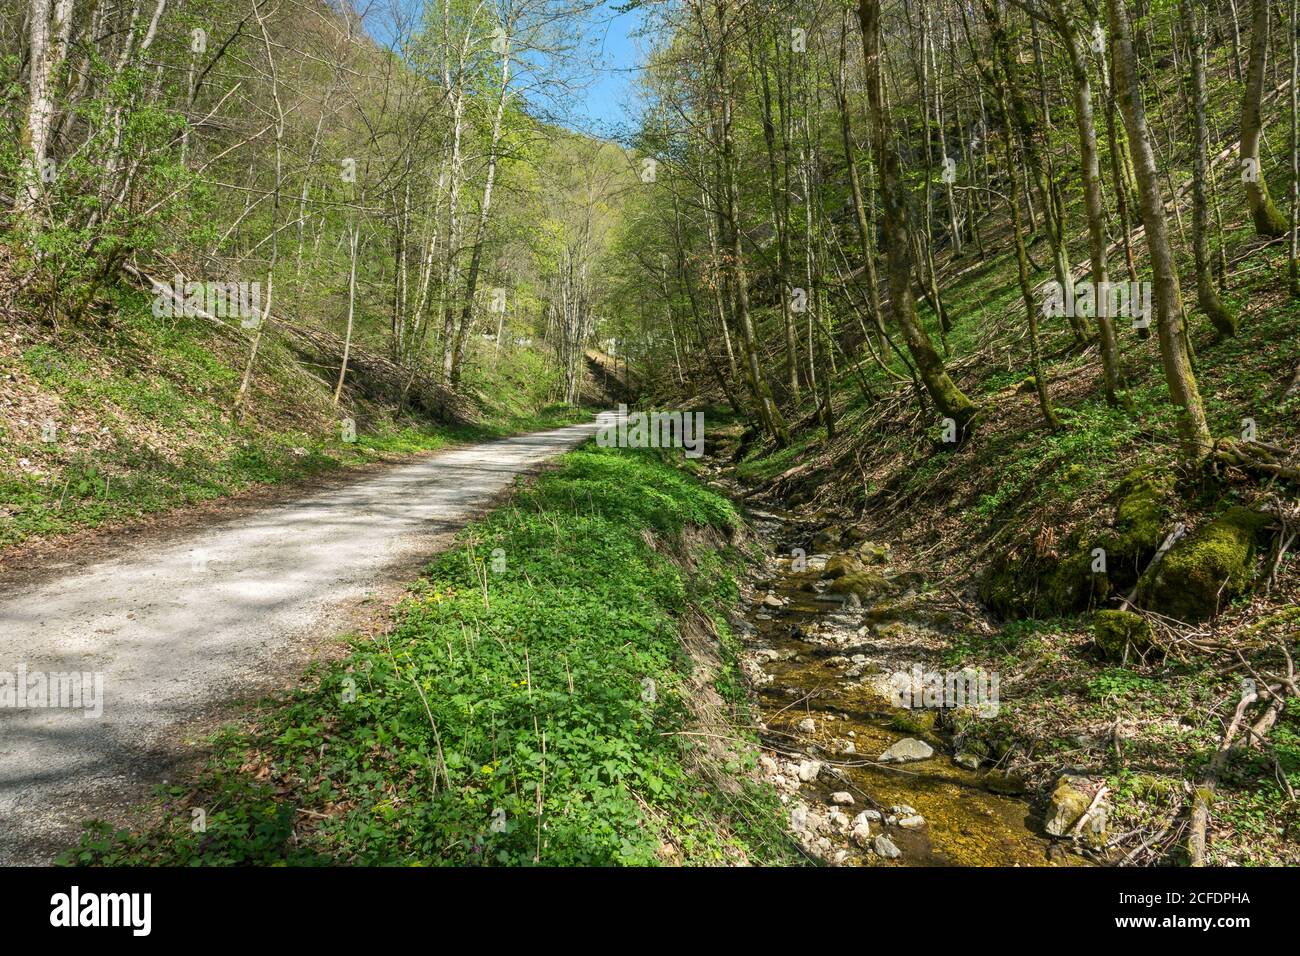 Germany, Baden-Württemberg, Bad Urach - Seeburg, at the transition from the Mühltal to the Trailfinger Schlucht above the Ermsursprung Stock Photo